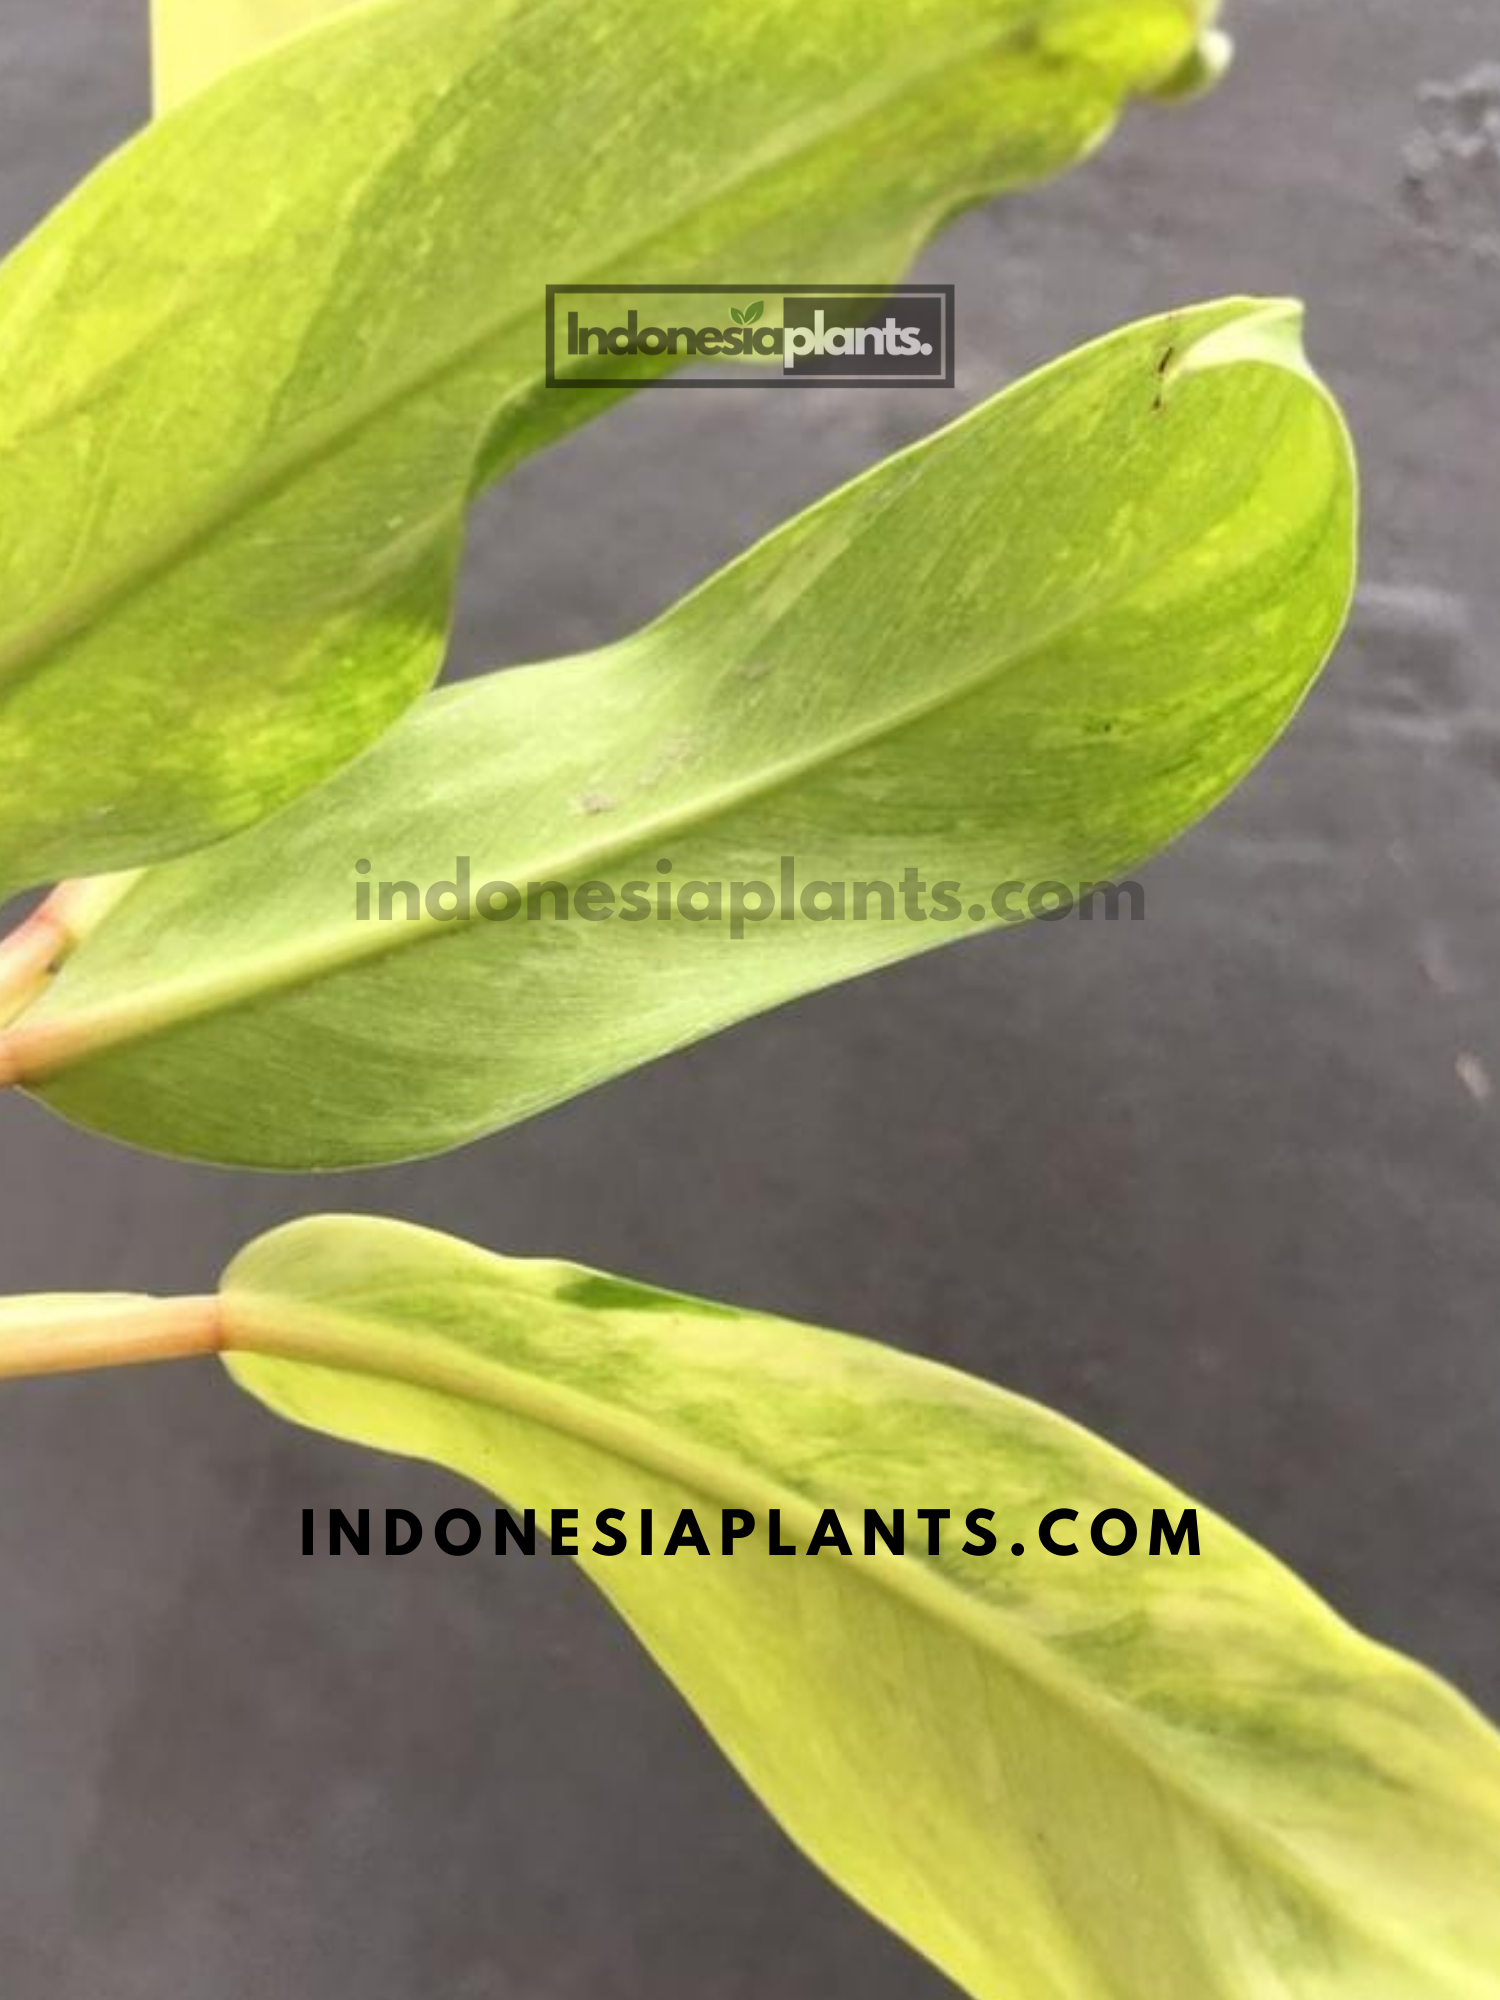 Philodendron Lemon Lime Variegated